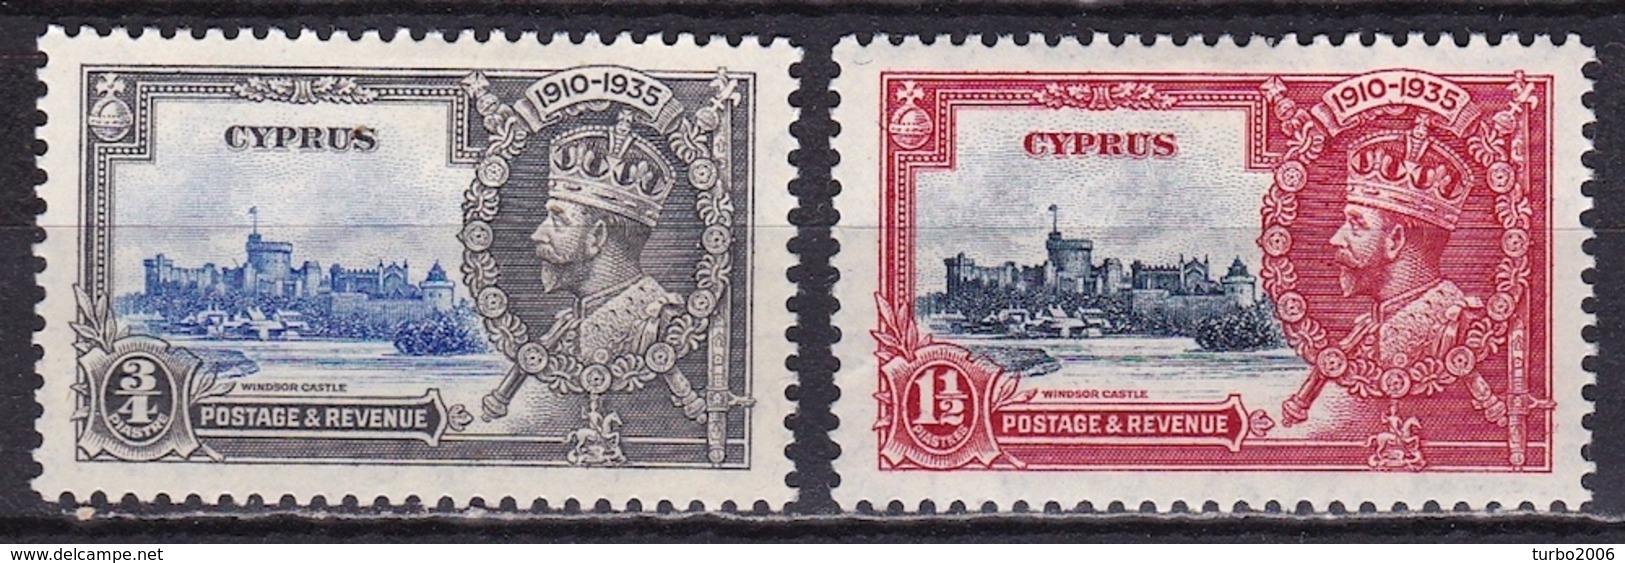 CYPRUS 1935 King George V Silver Jubilee 2 Values From The Set Vl. 138 - 139 MH - Cyprus (...-1960)